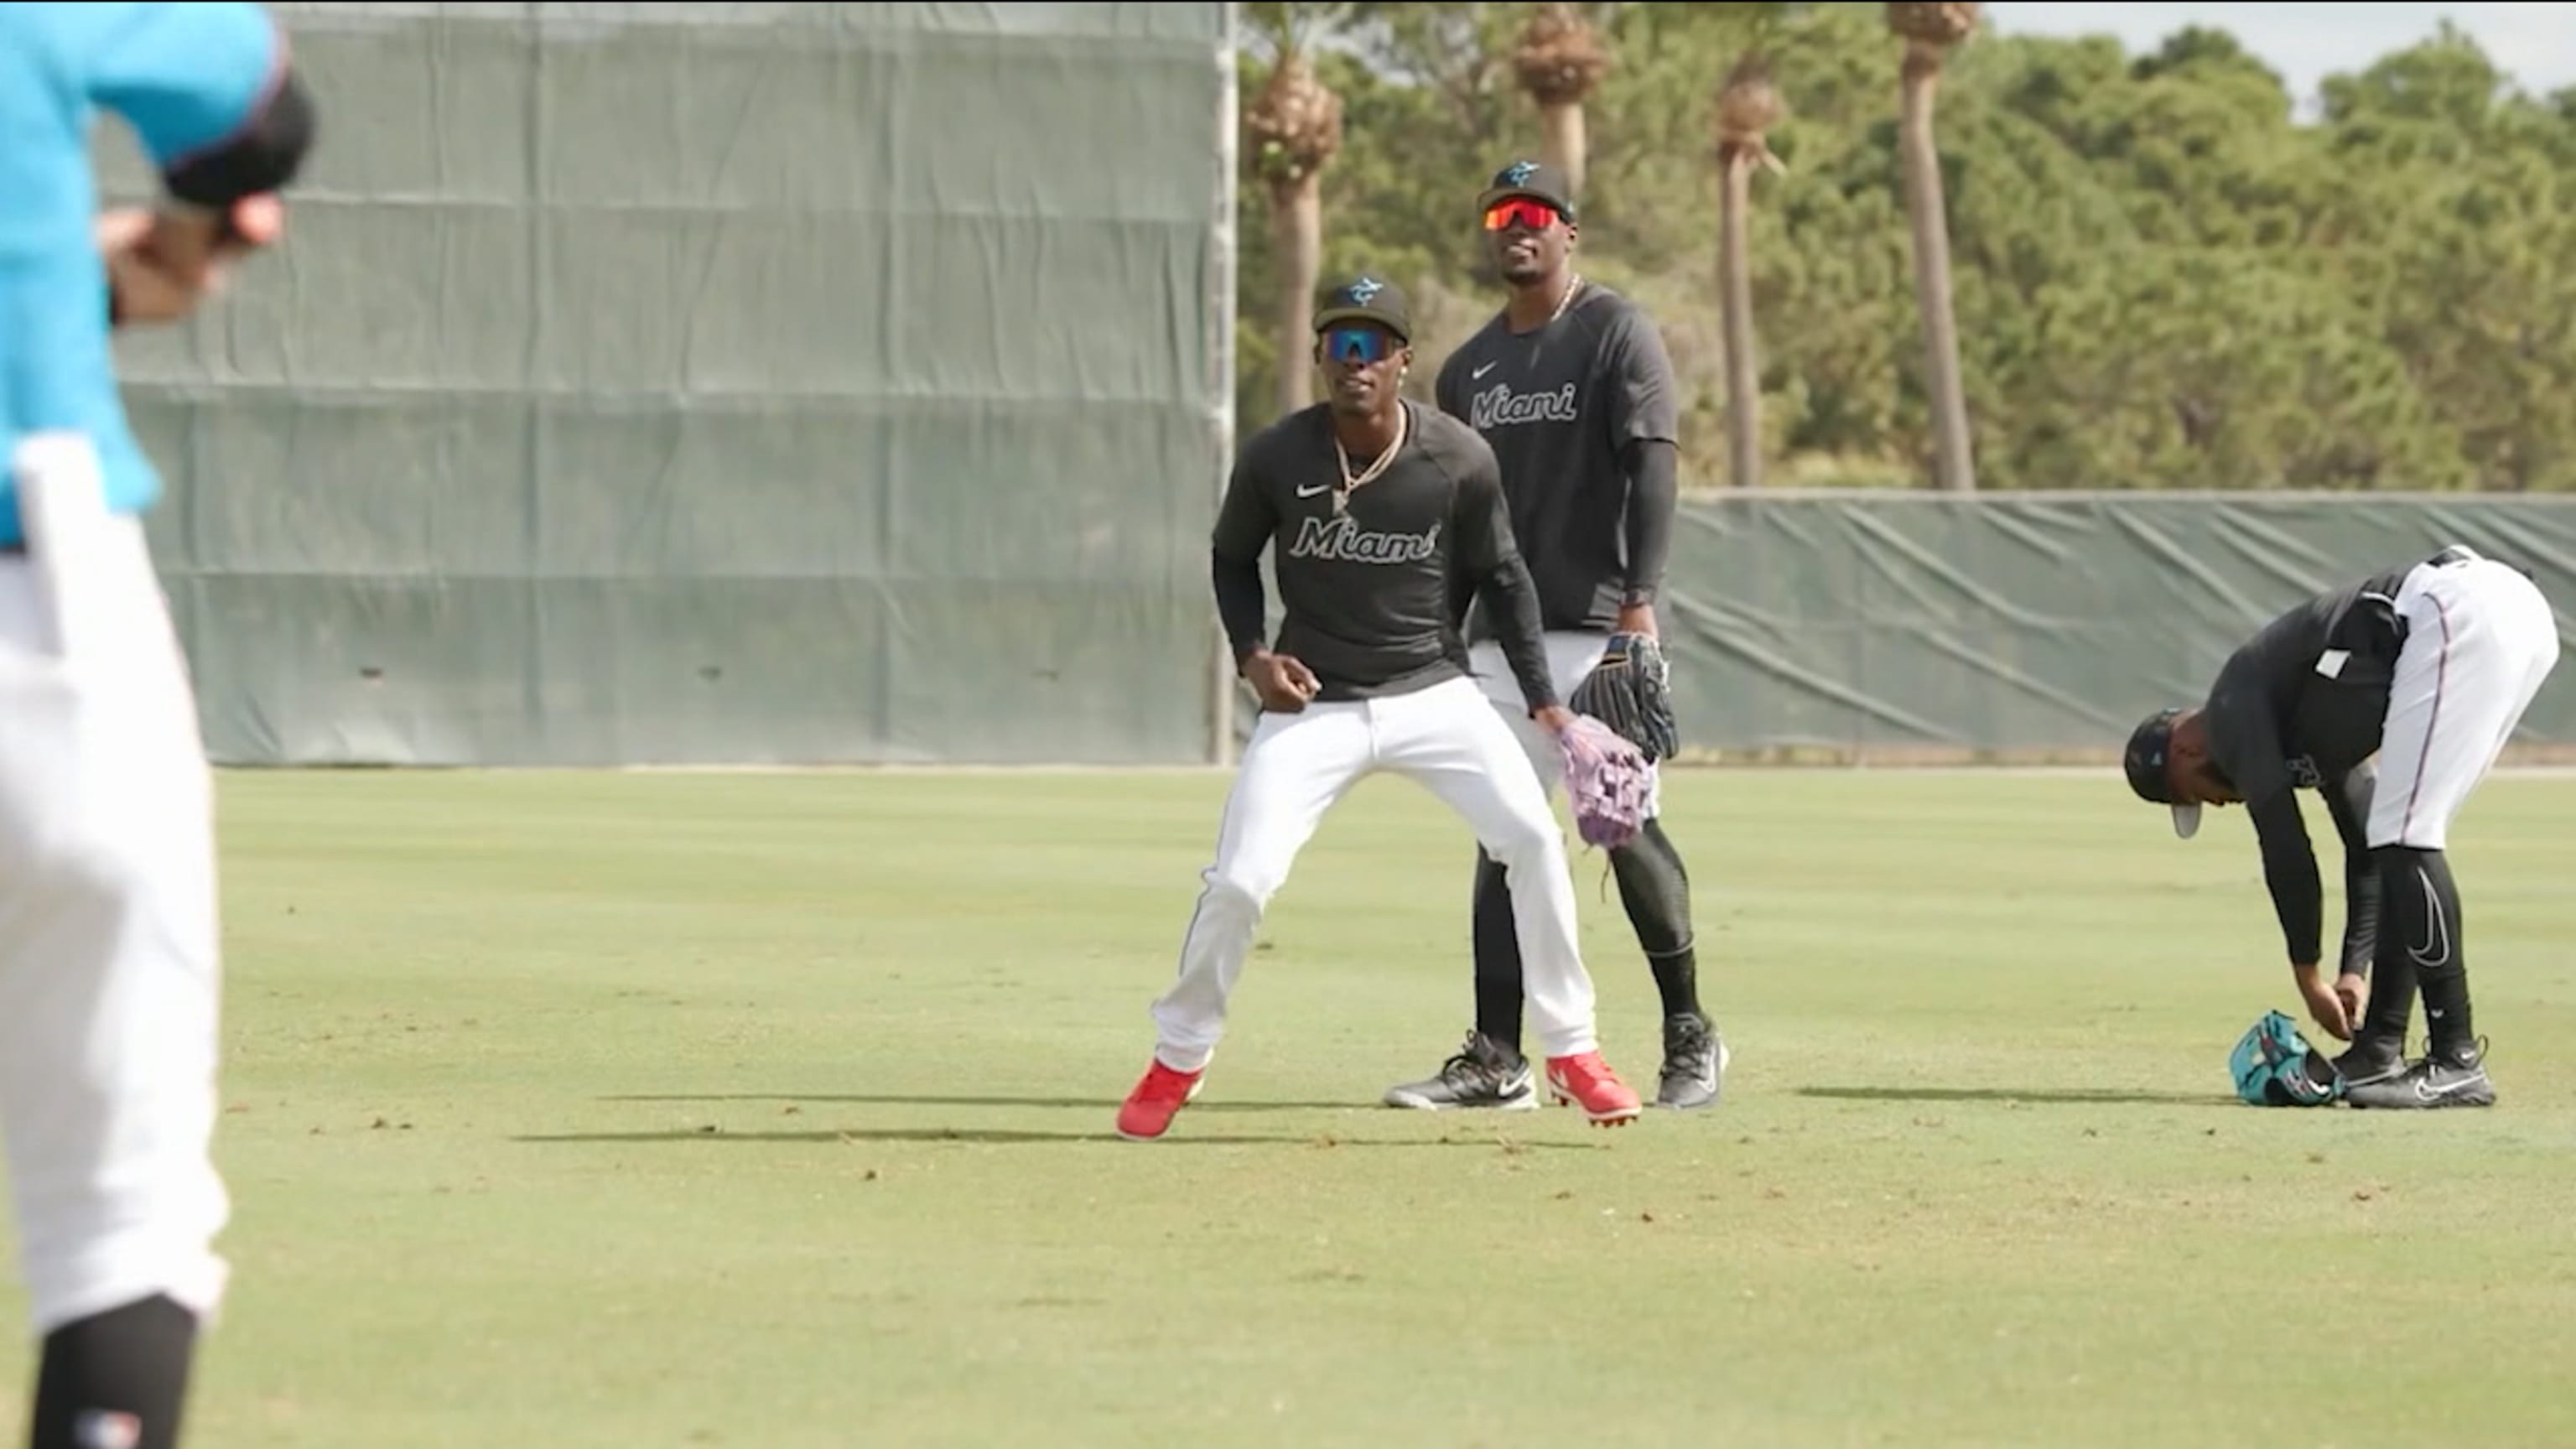 Miami Marlins' Jazz Chisholm battles outfield 'learning curve